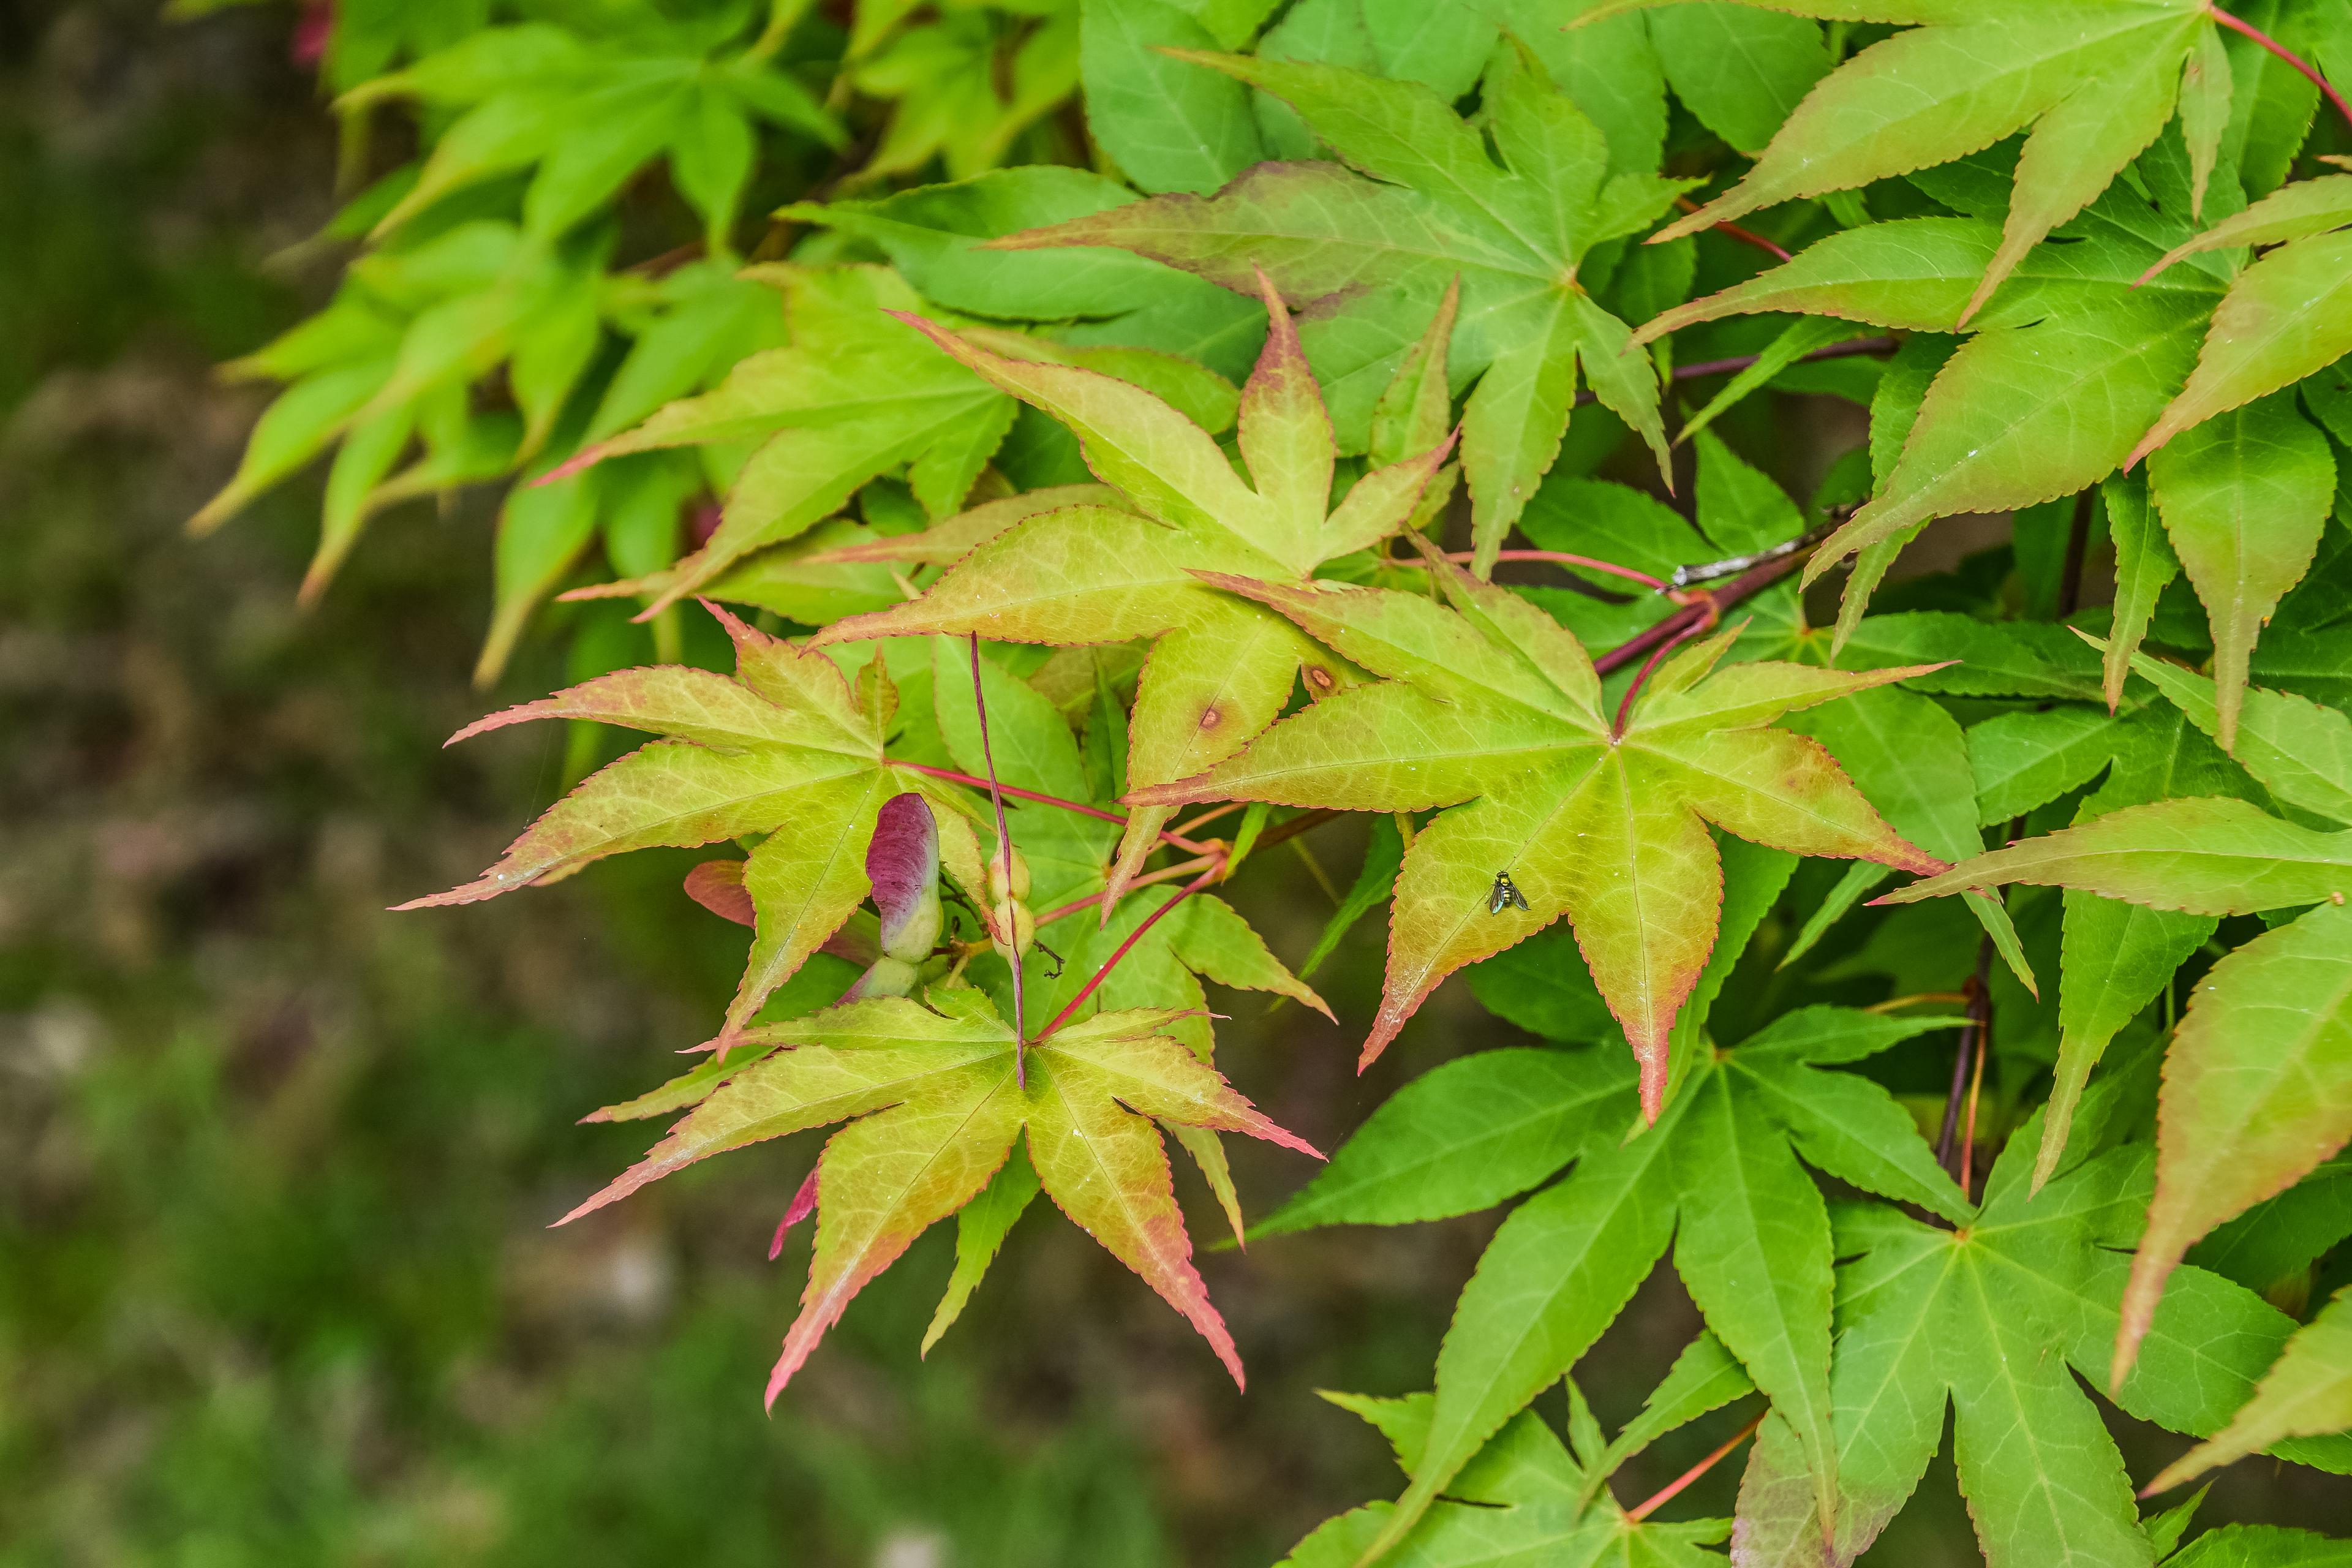 pink-green leaves with dark-pink stems